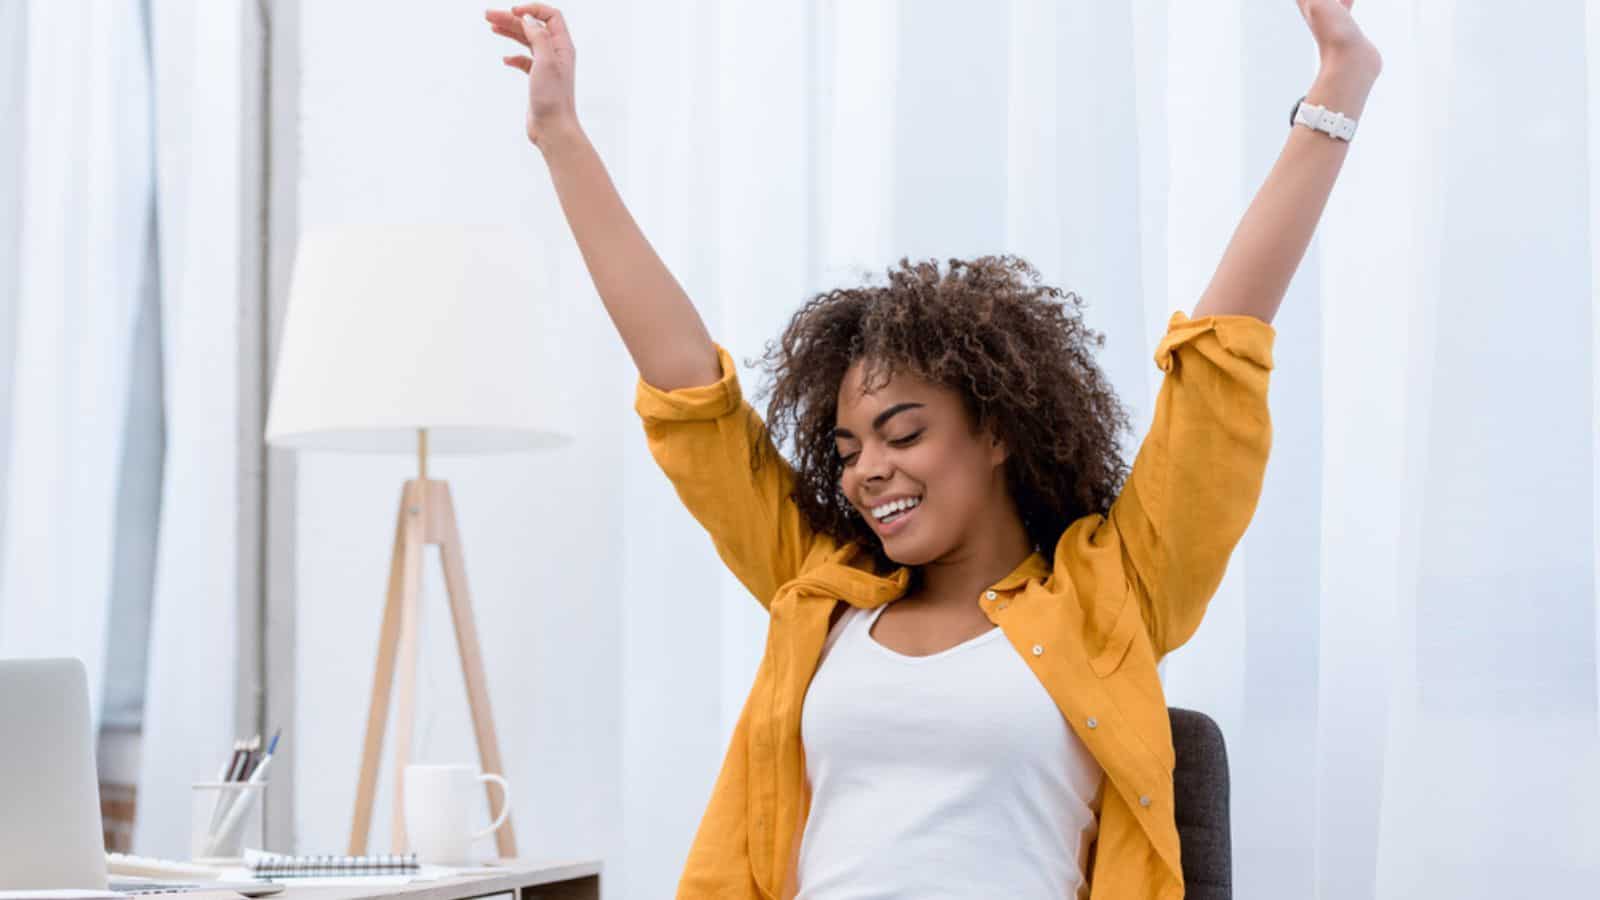 Happy young woman with raised hands